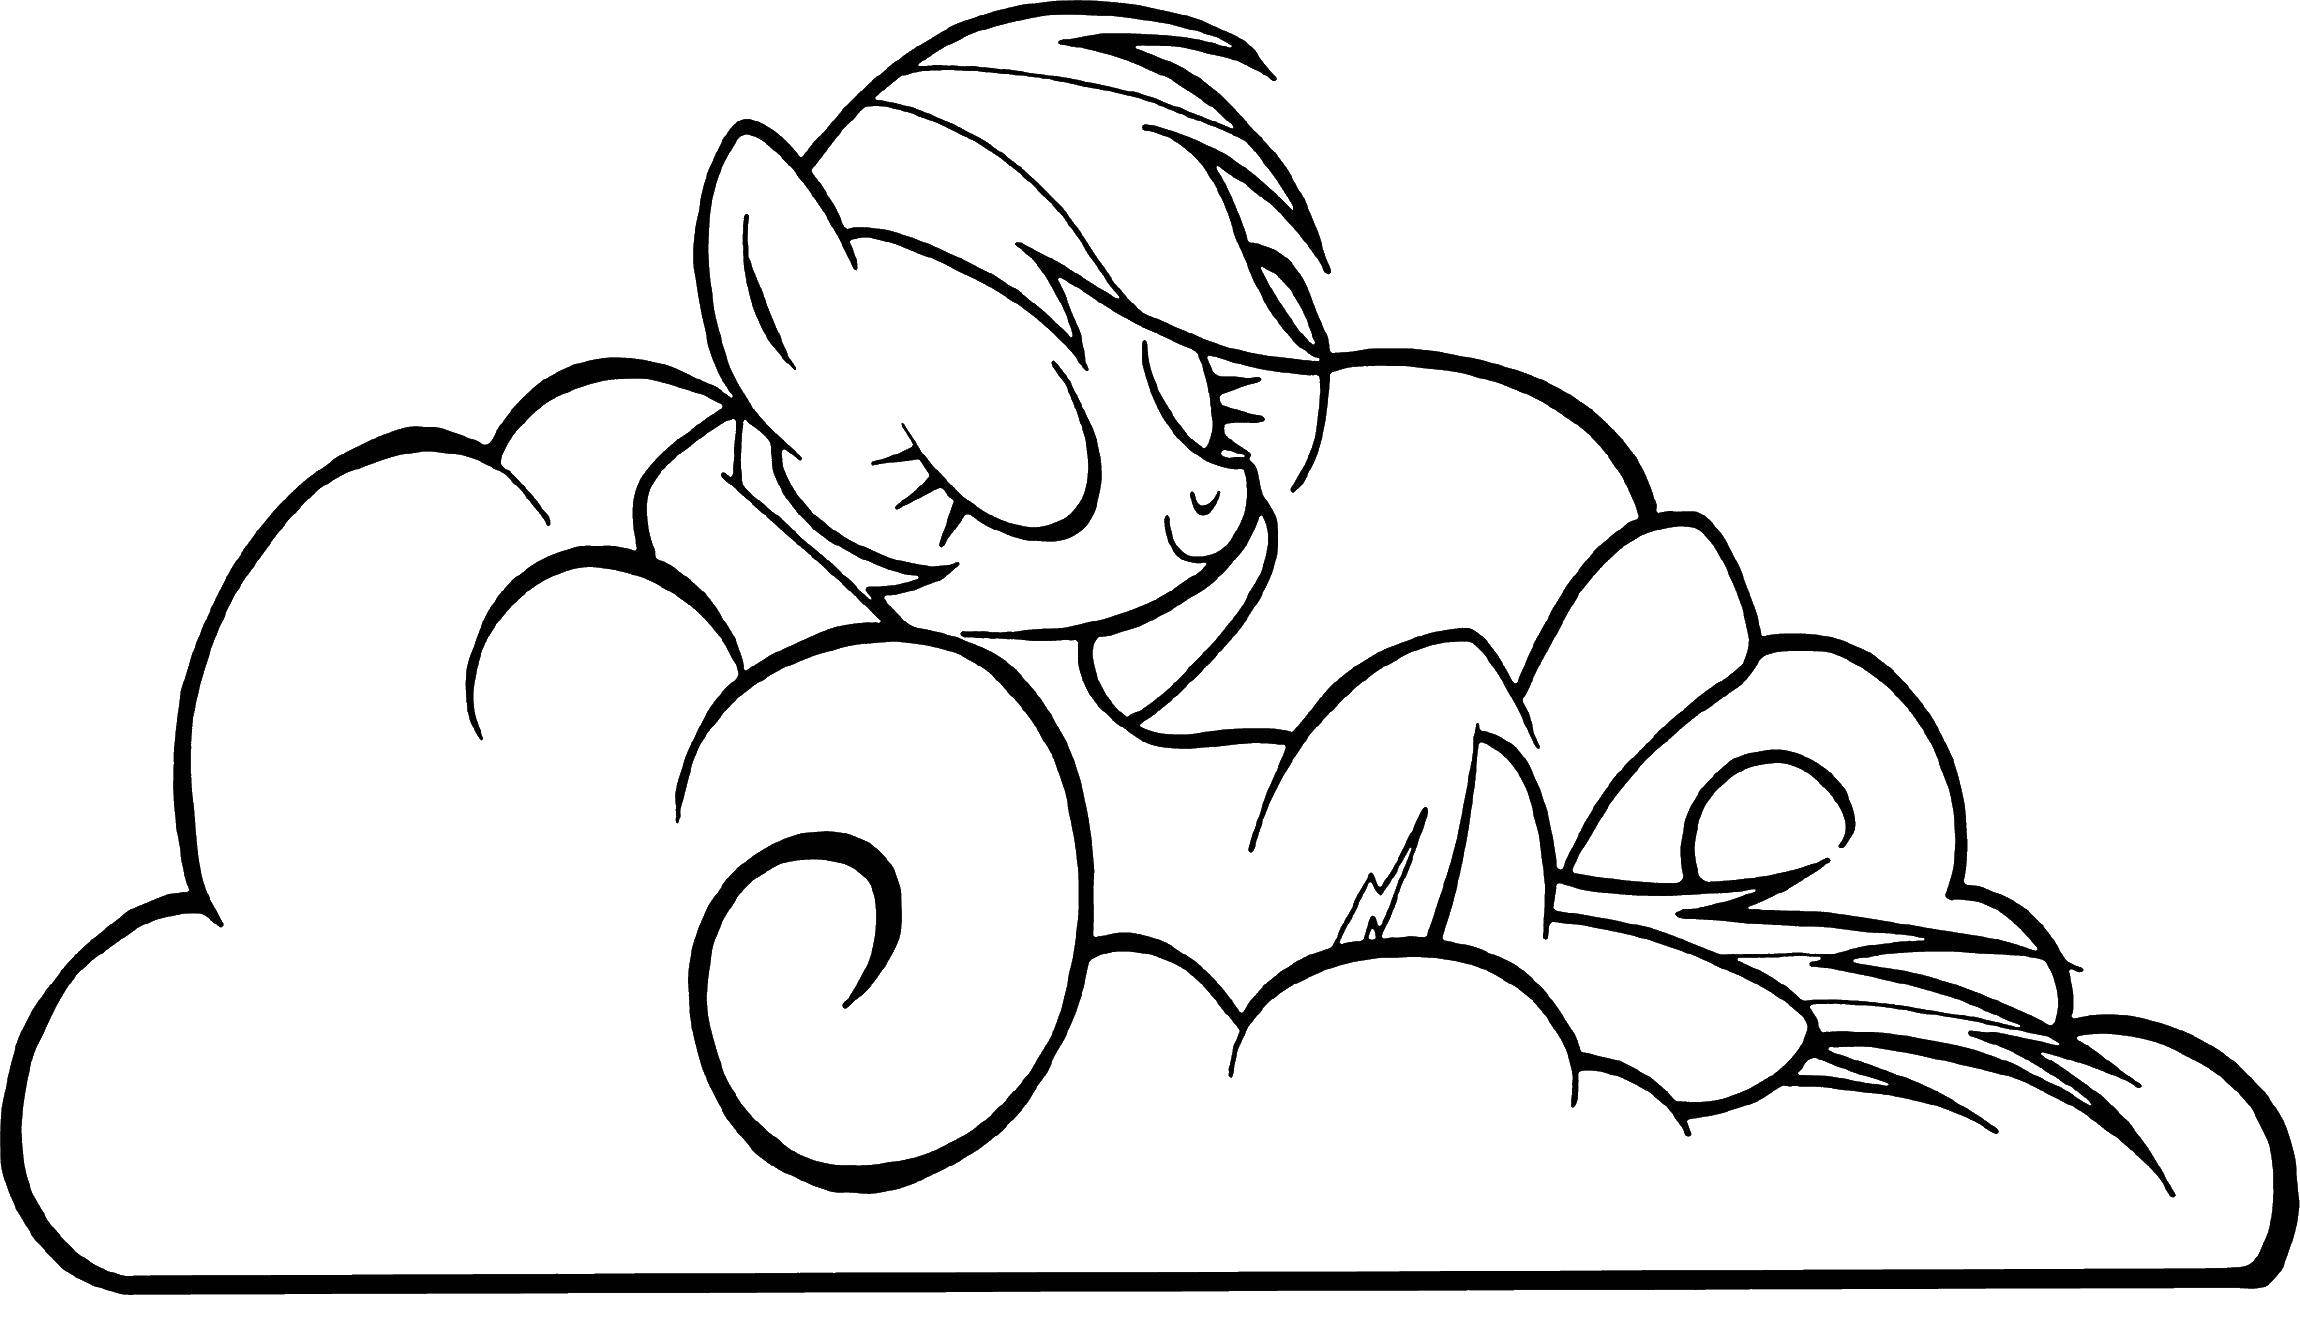 Coloring Ponies from my little pony lying on a cloud. Category Ponies. Tags:  Pony, My little pony.